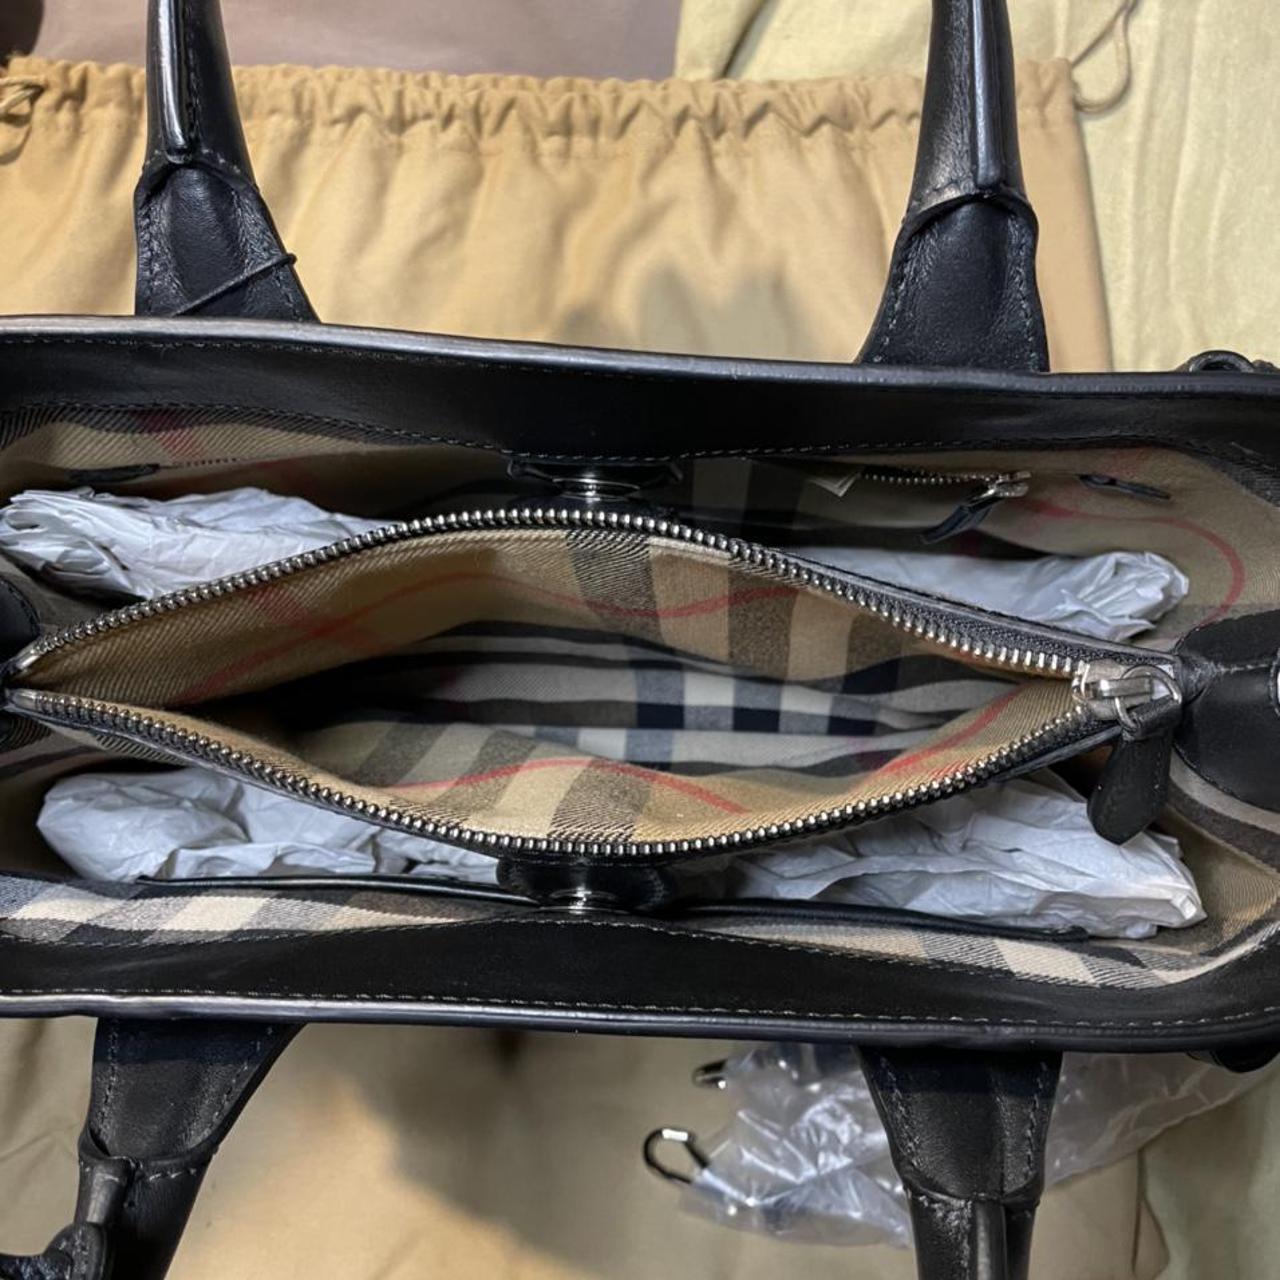 banner real burberry bag message before buying - Depop